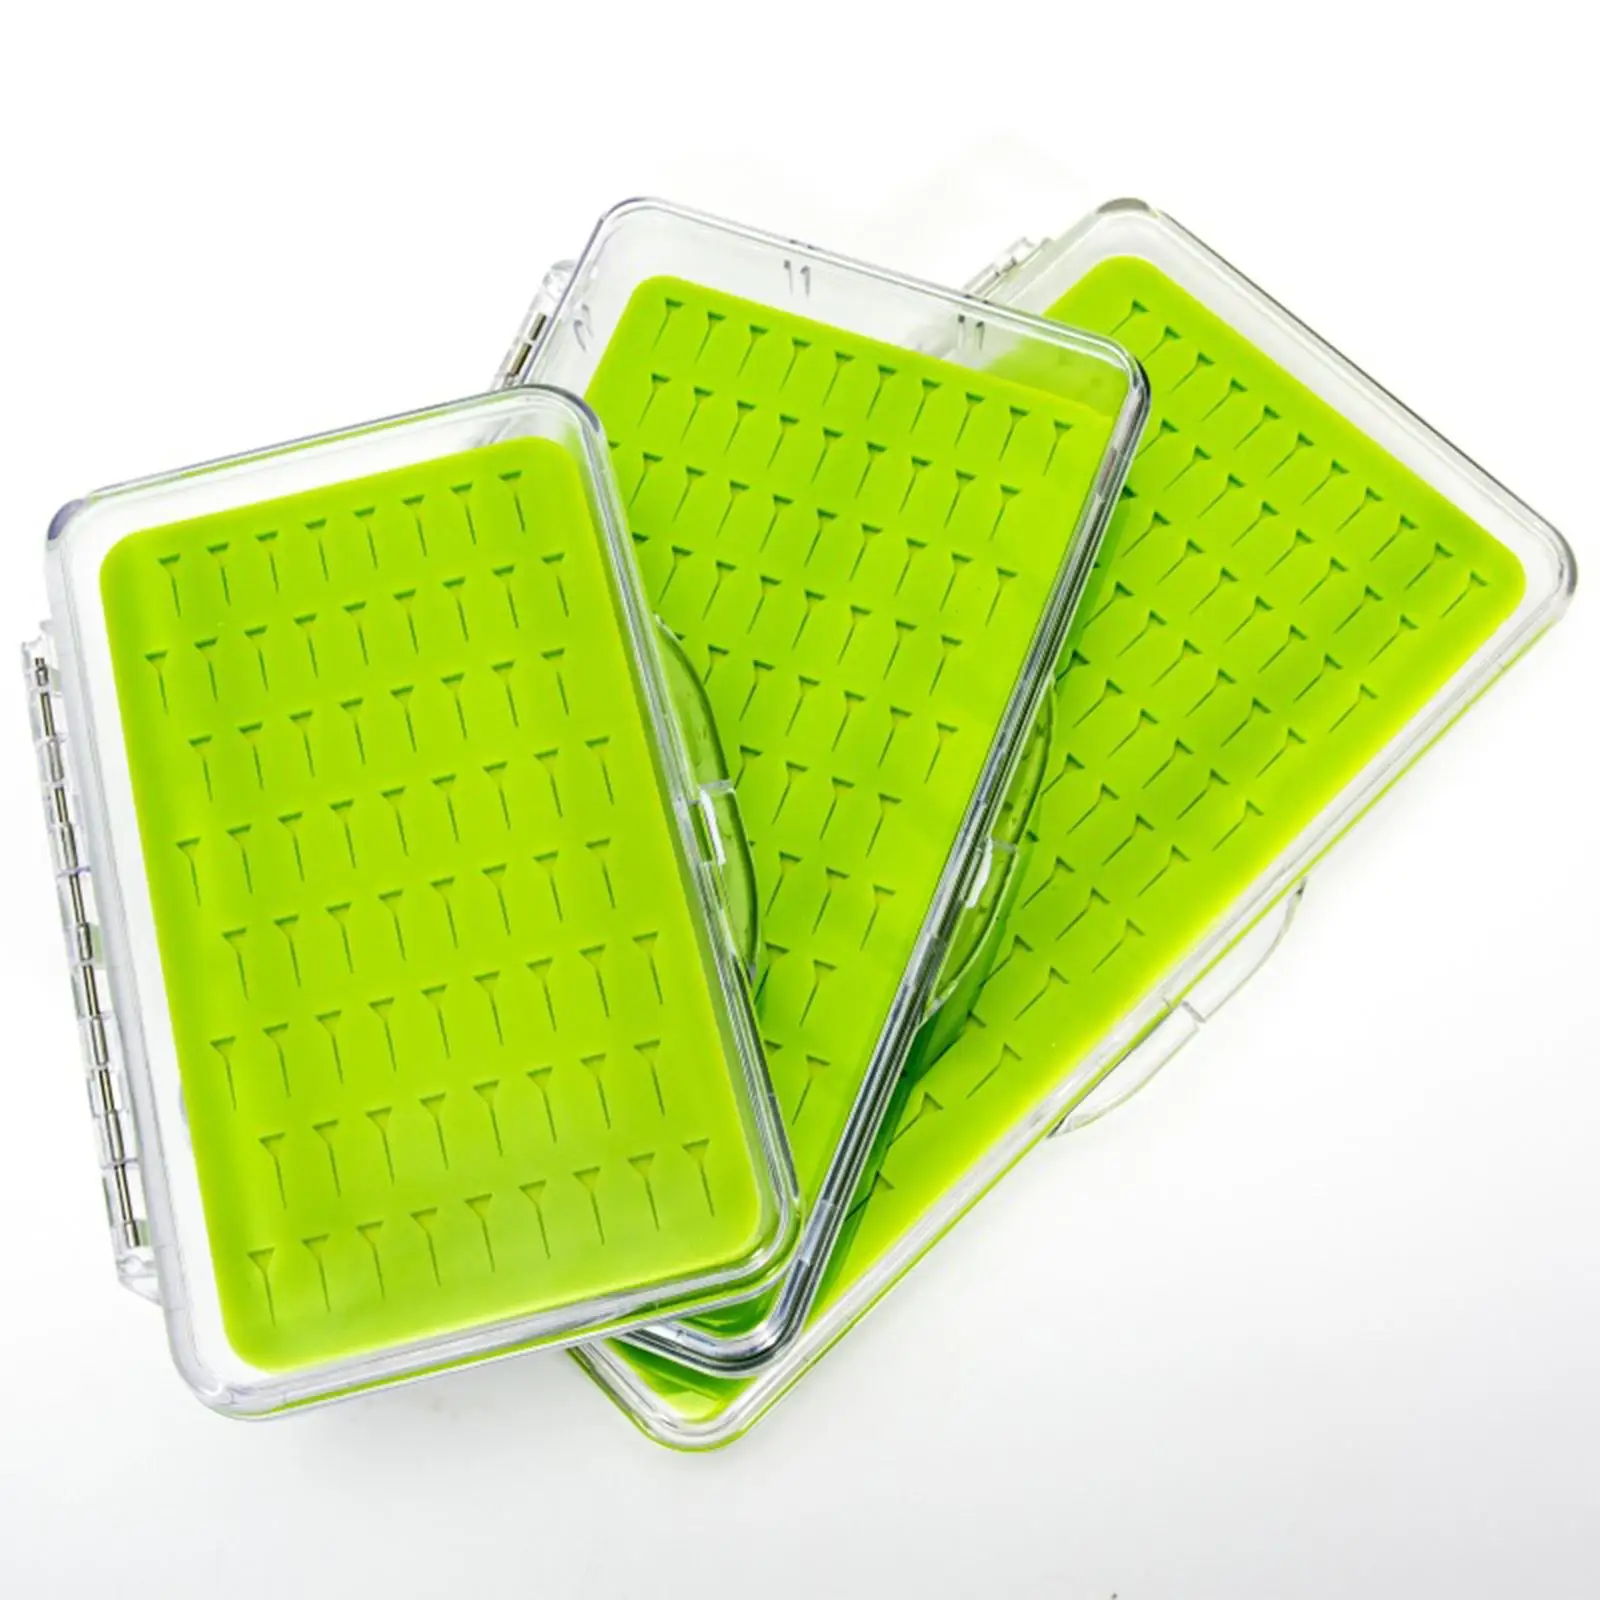 Waterproof Fly Fishing Box Clear Lid Silicone Fishing Tackle Bait Box Fishing Streamer Case Organizer